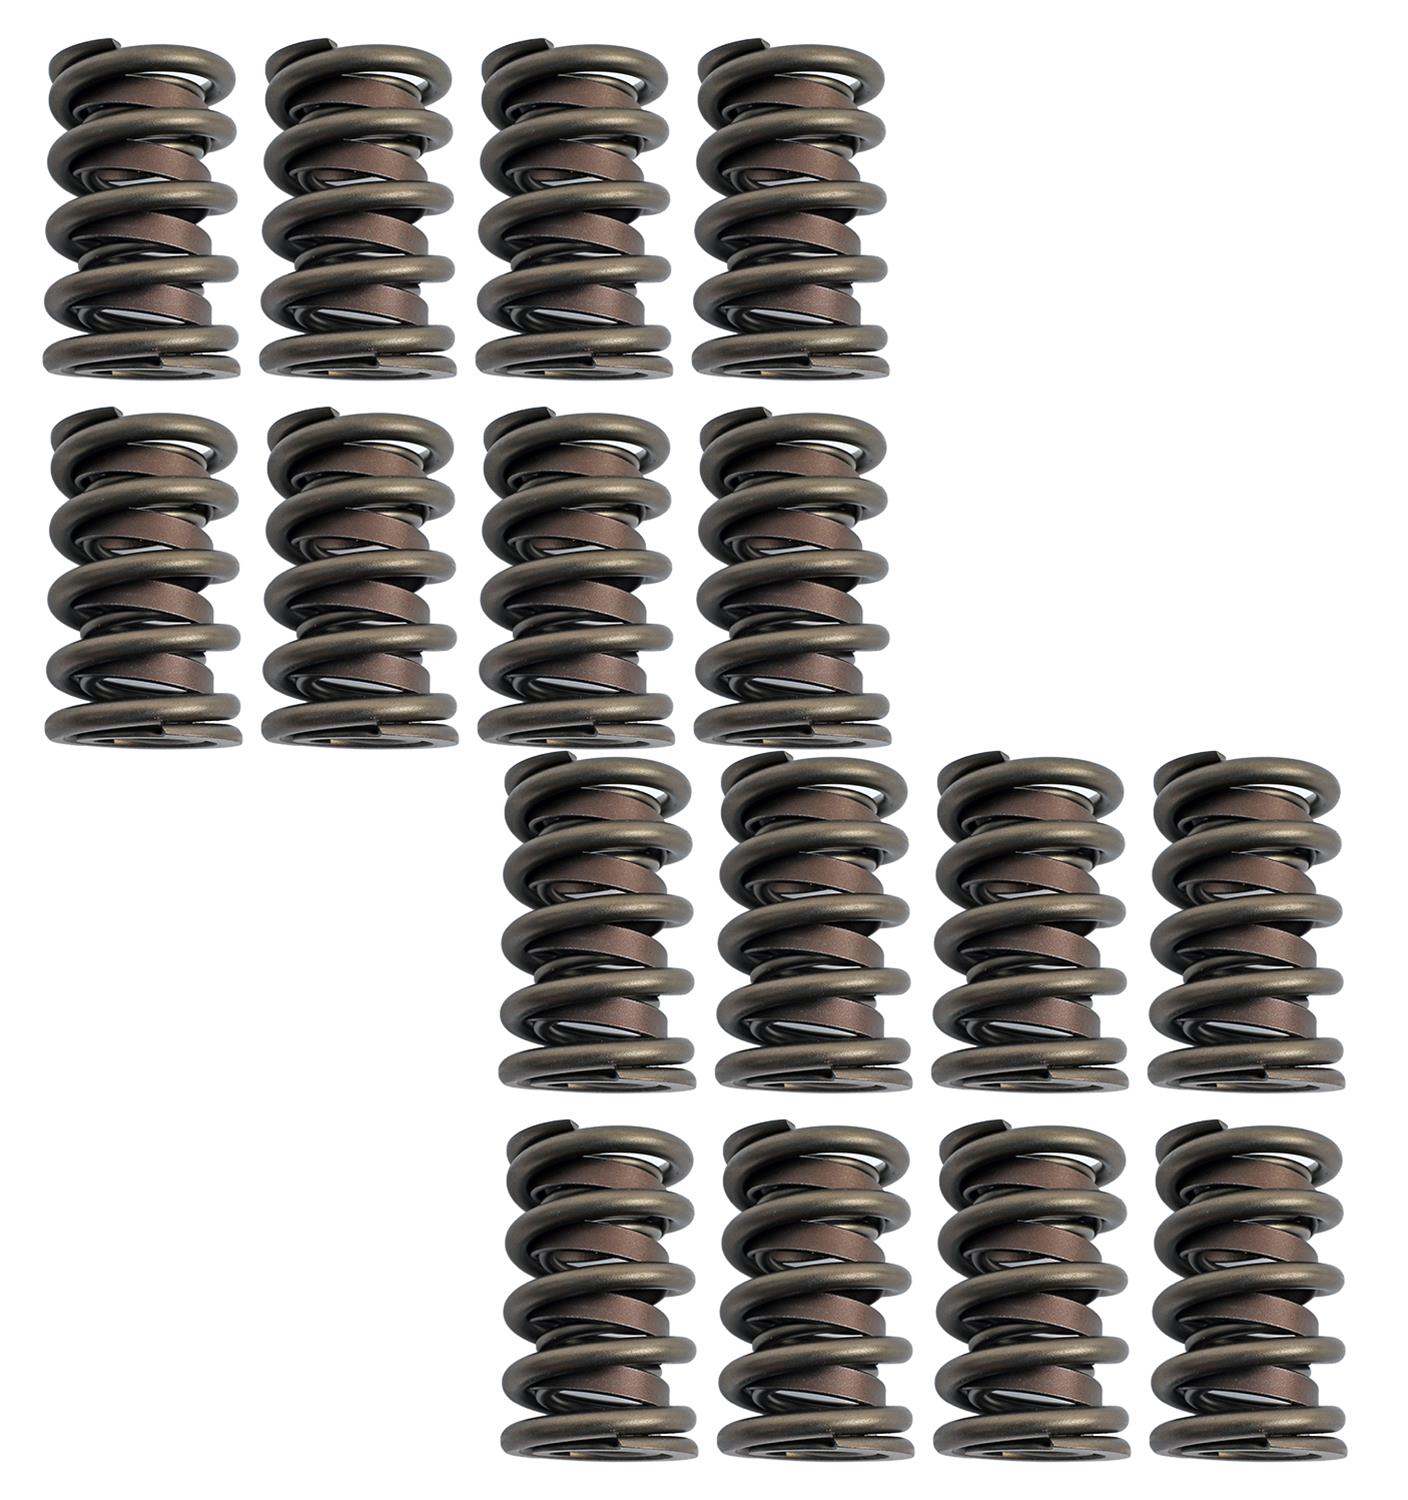 COMP Cams 954-16 COMP Cams Valve Springs Summit Racing